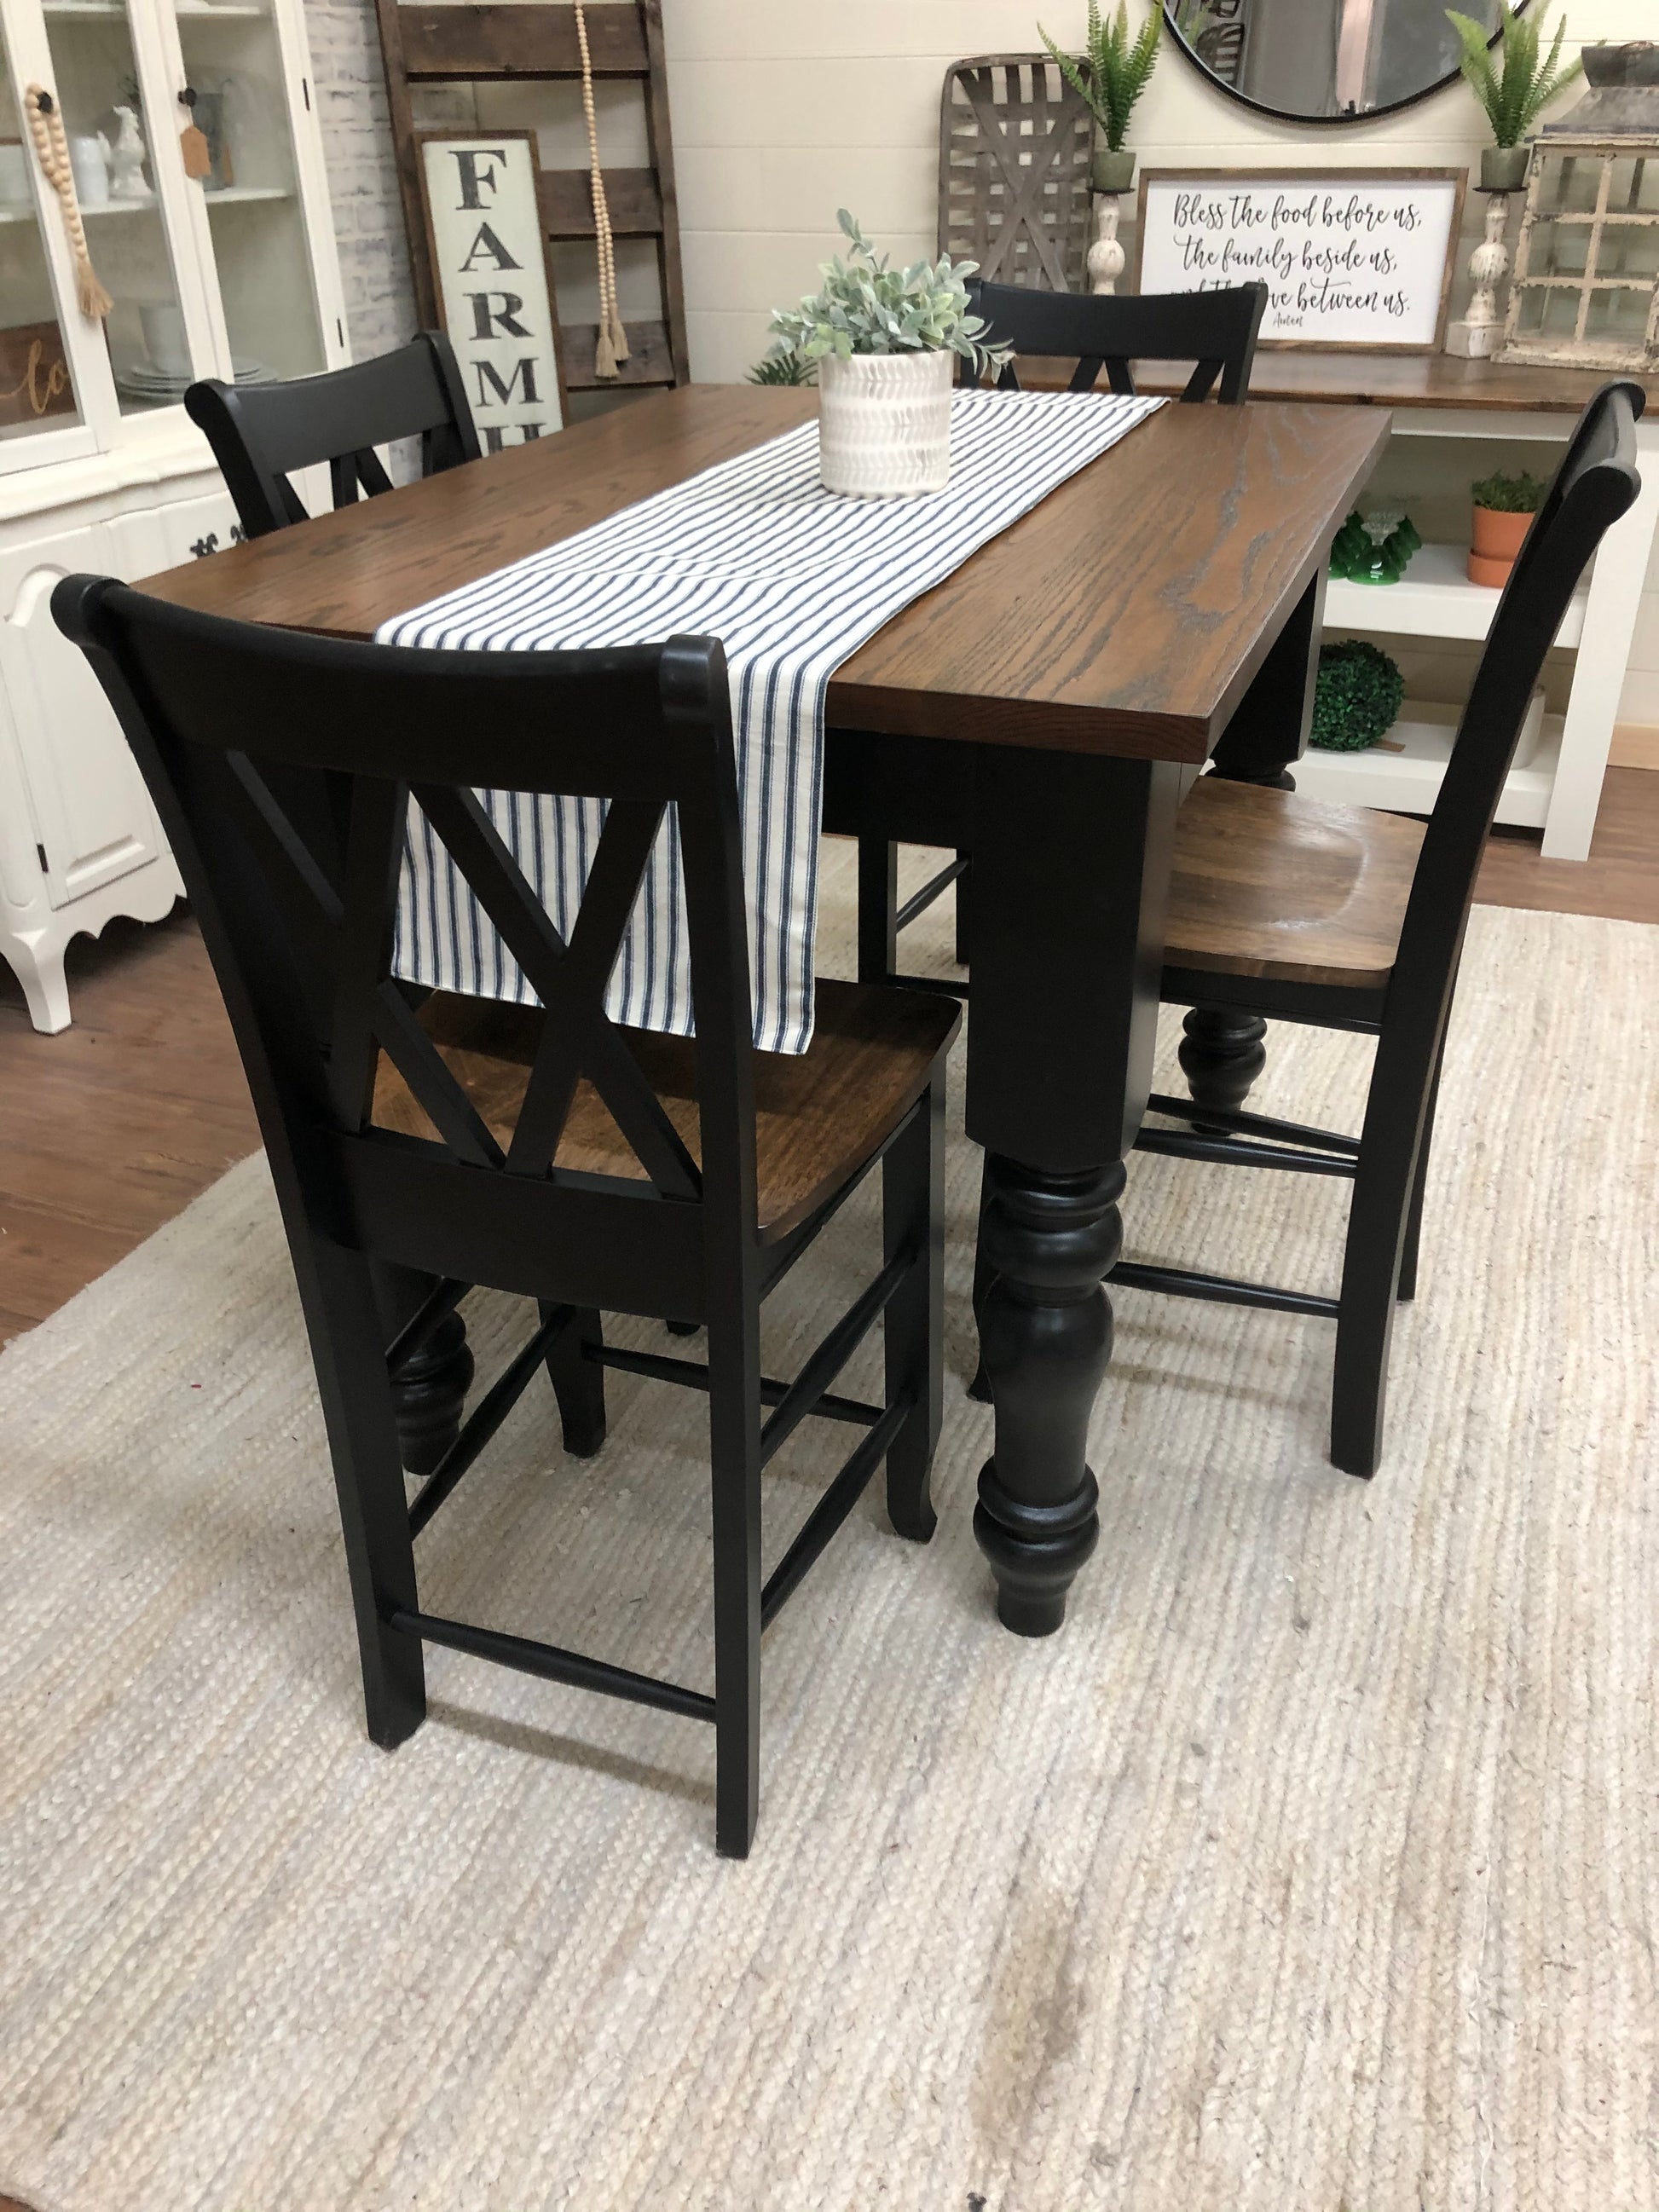 Pictured with a 4' L x 36" W Red Oak with Espresso stain and Black painted base. Pictured with 4 Double Cross Back Counter Height Stools..